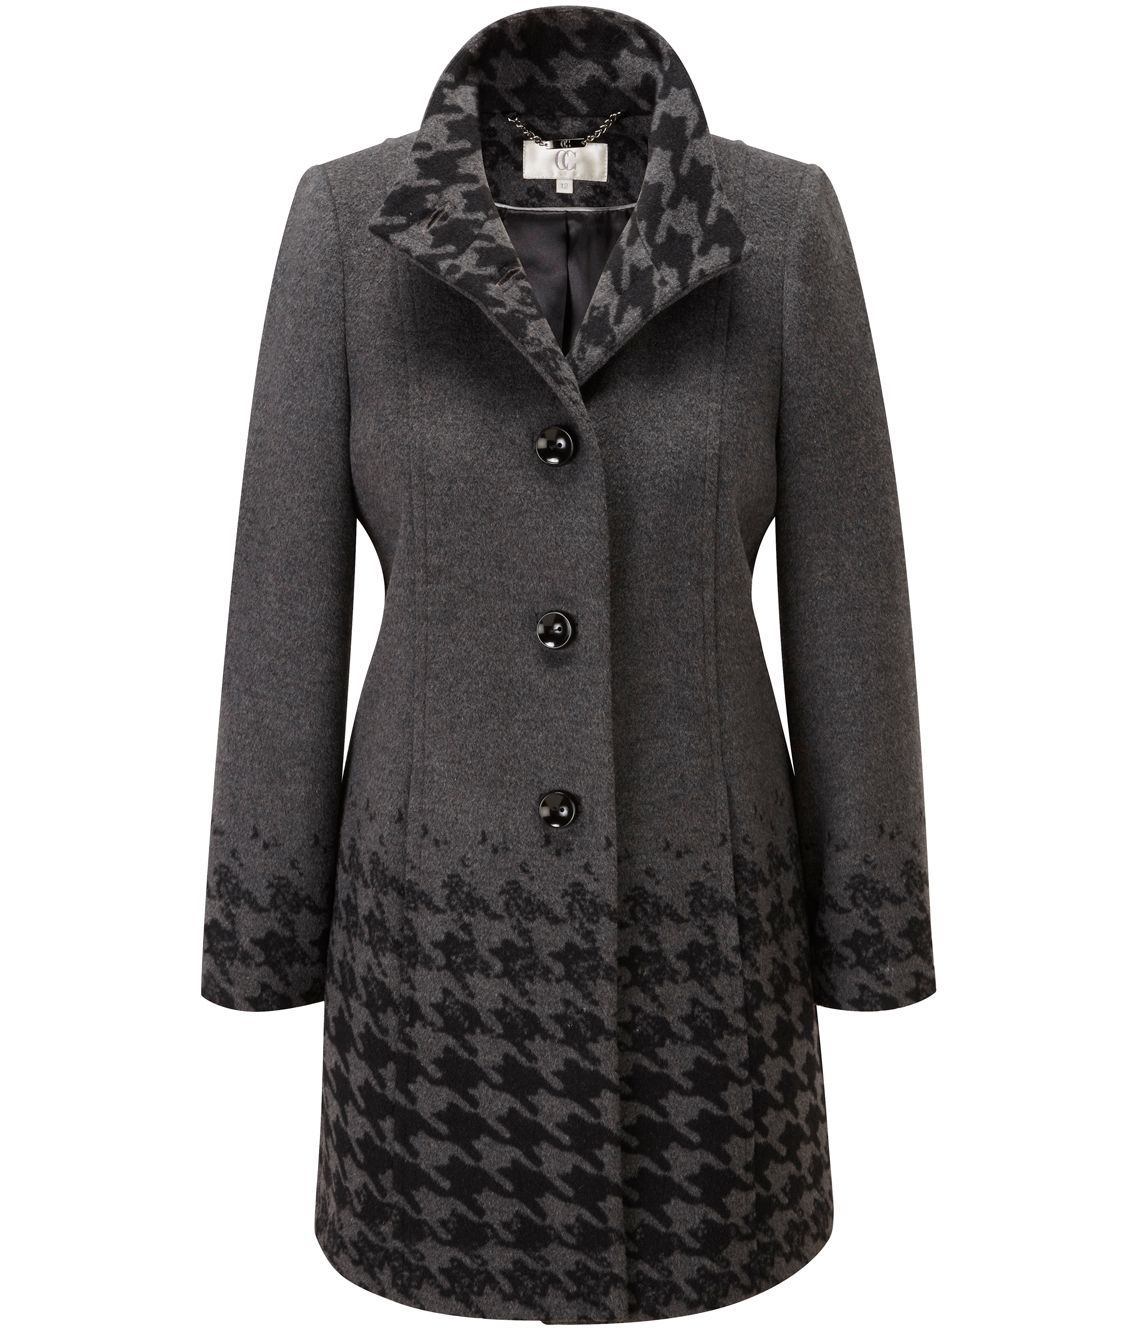 Cc Dogtooth Coat in Gray (Grey) | Lyst